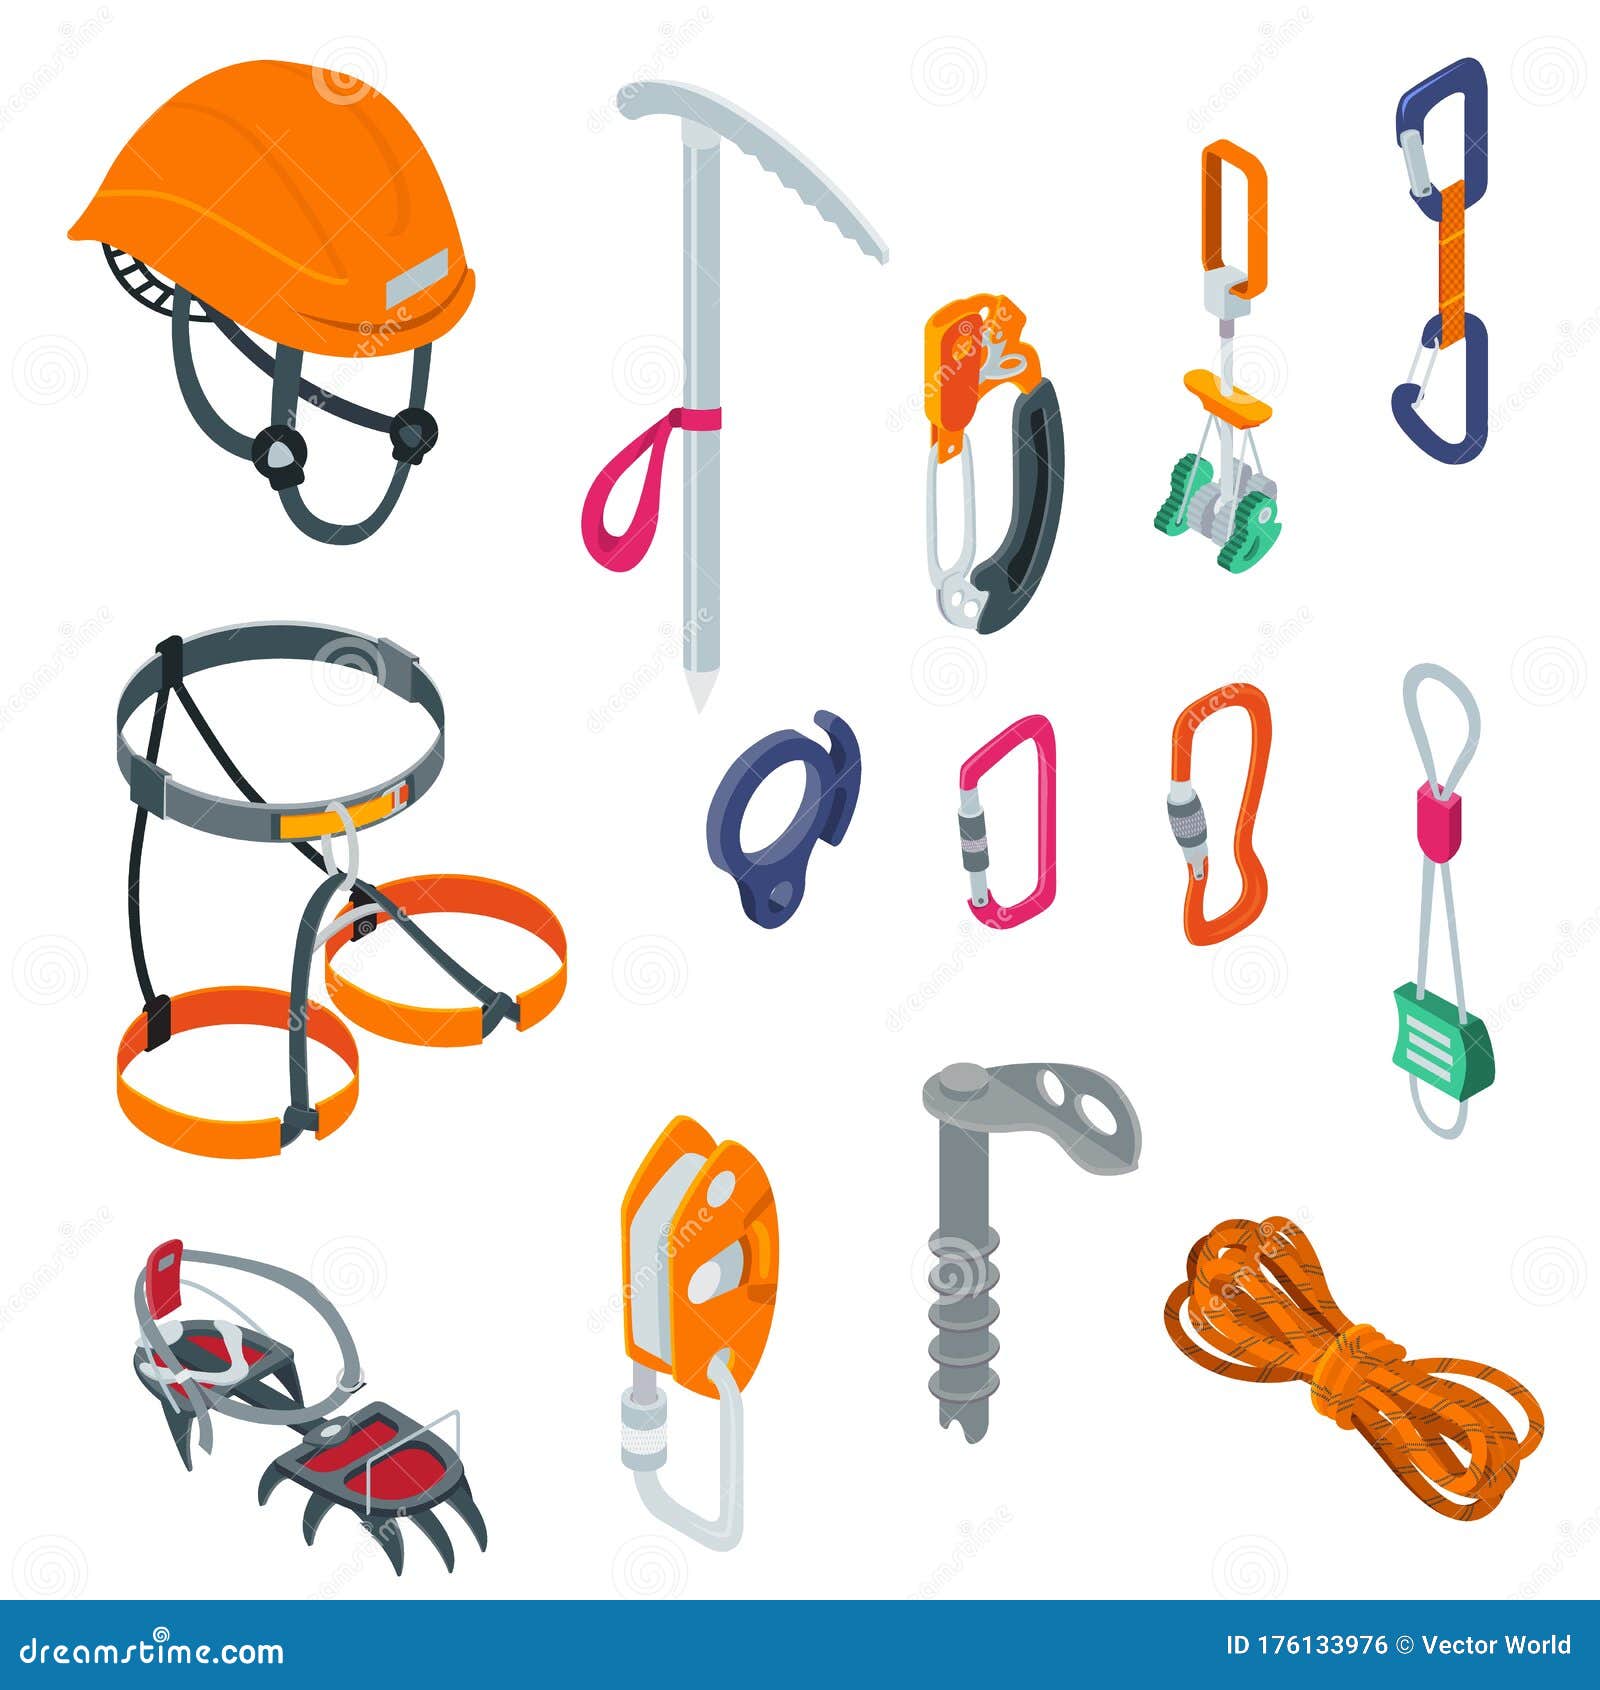 mountaineering sport climbing equipment on alpinism extreme isometric    on white.